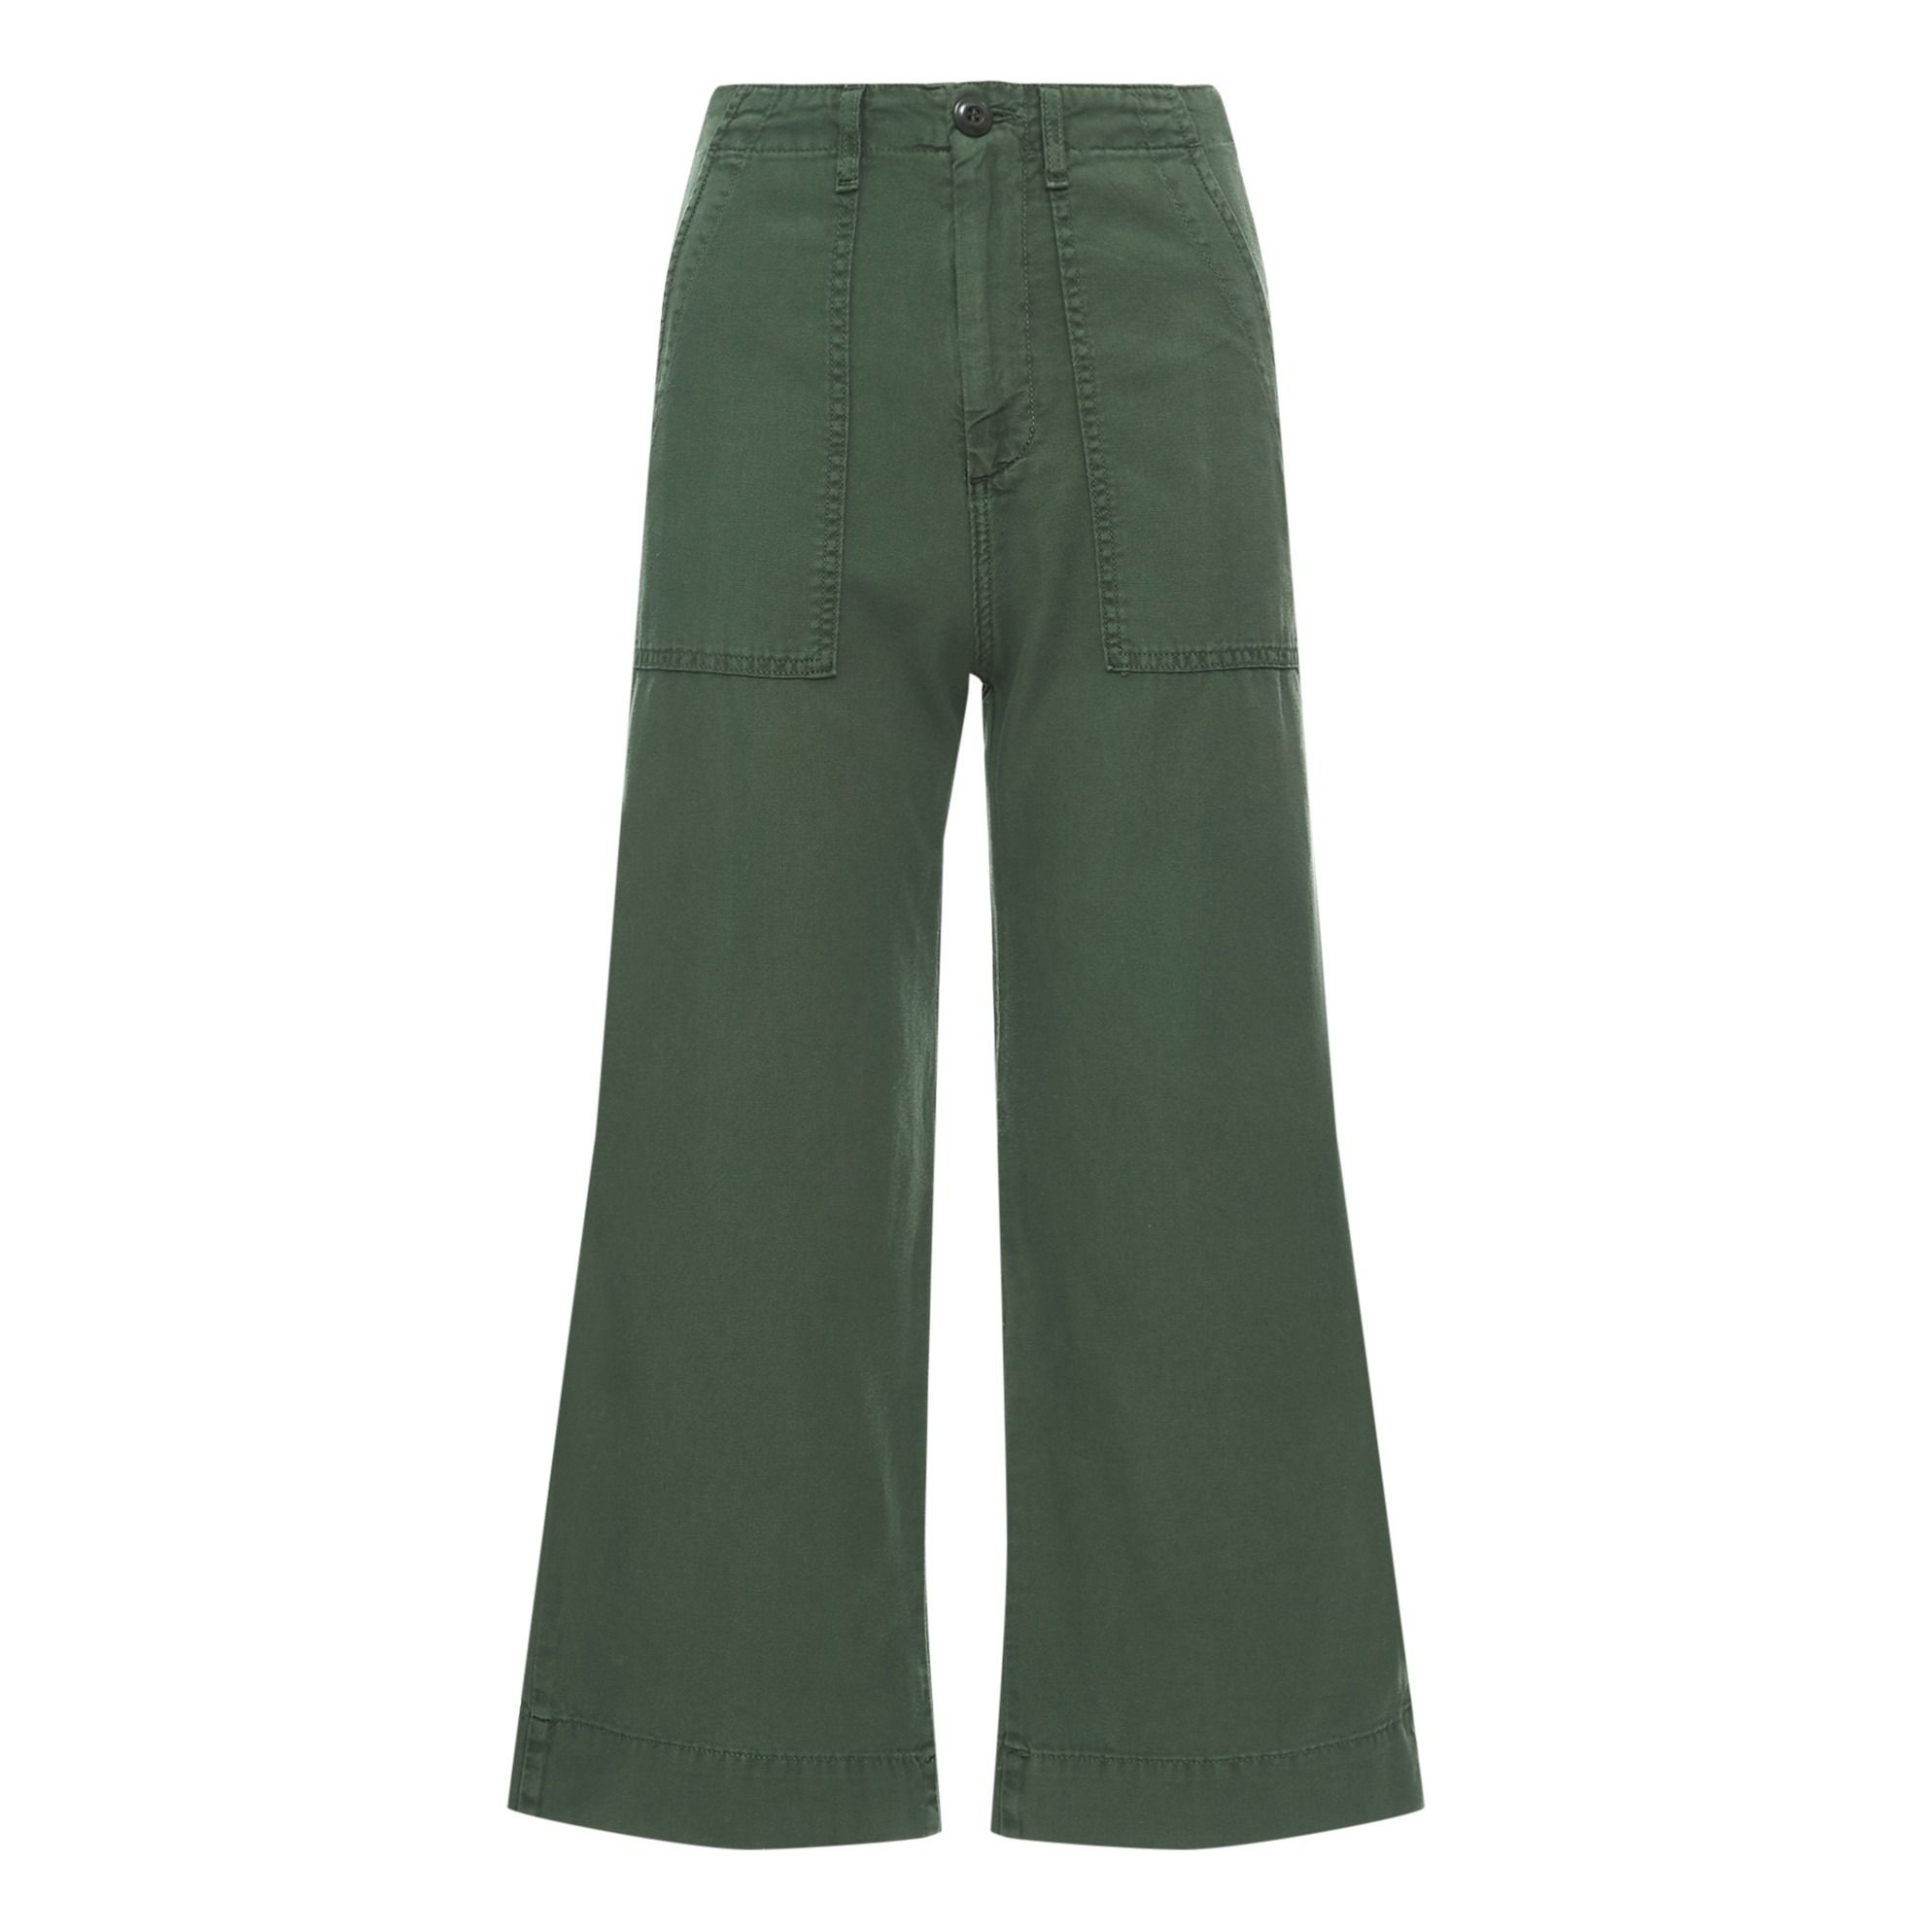 General Trousers Green The Great Fashion Adult